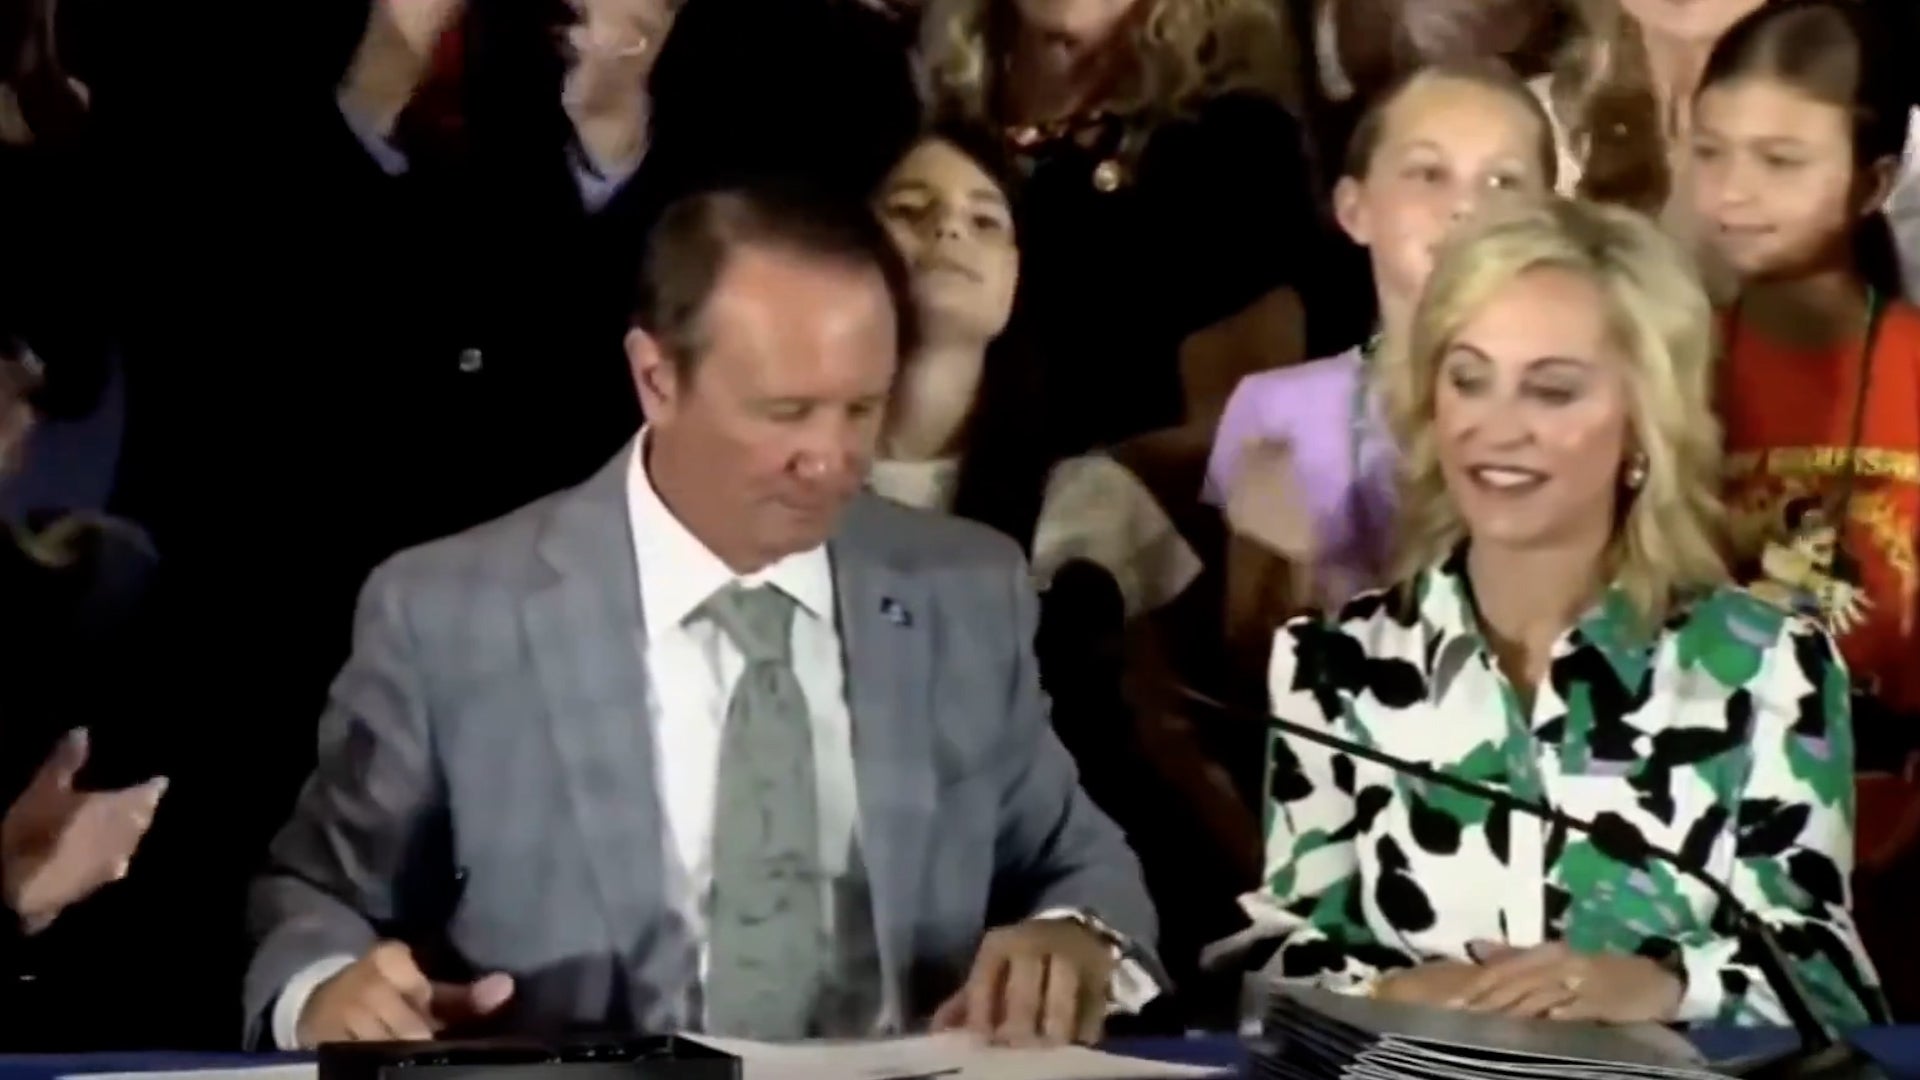 A student appears to faint as Louisiana Governor Jeff Landry signs legislation on June 19 that forces public schools to hand the Ten Commandments in every classroom